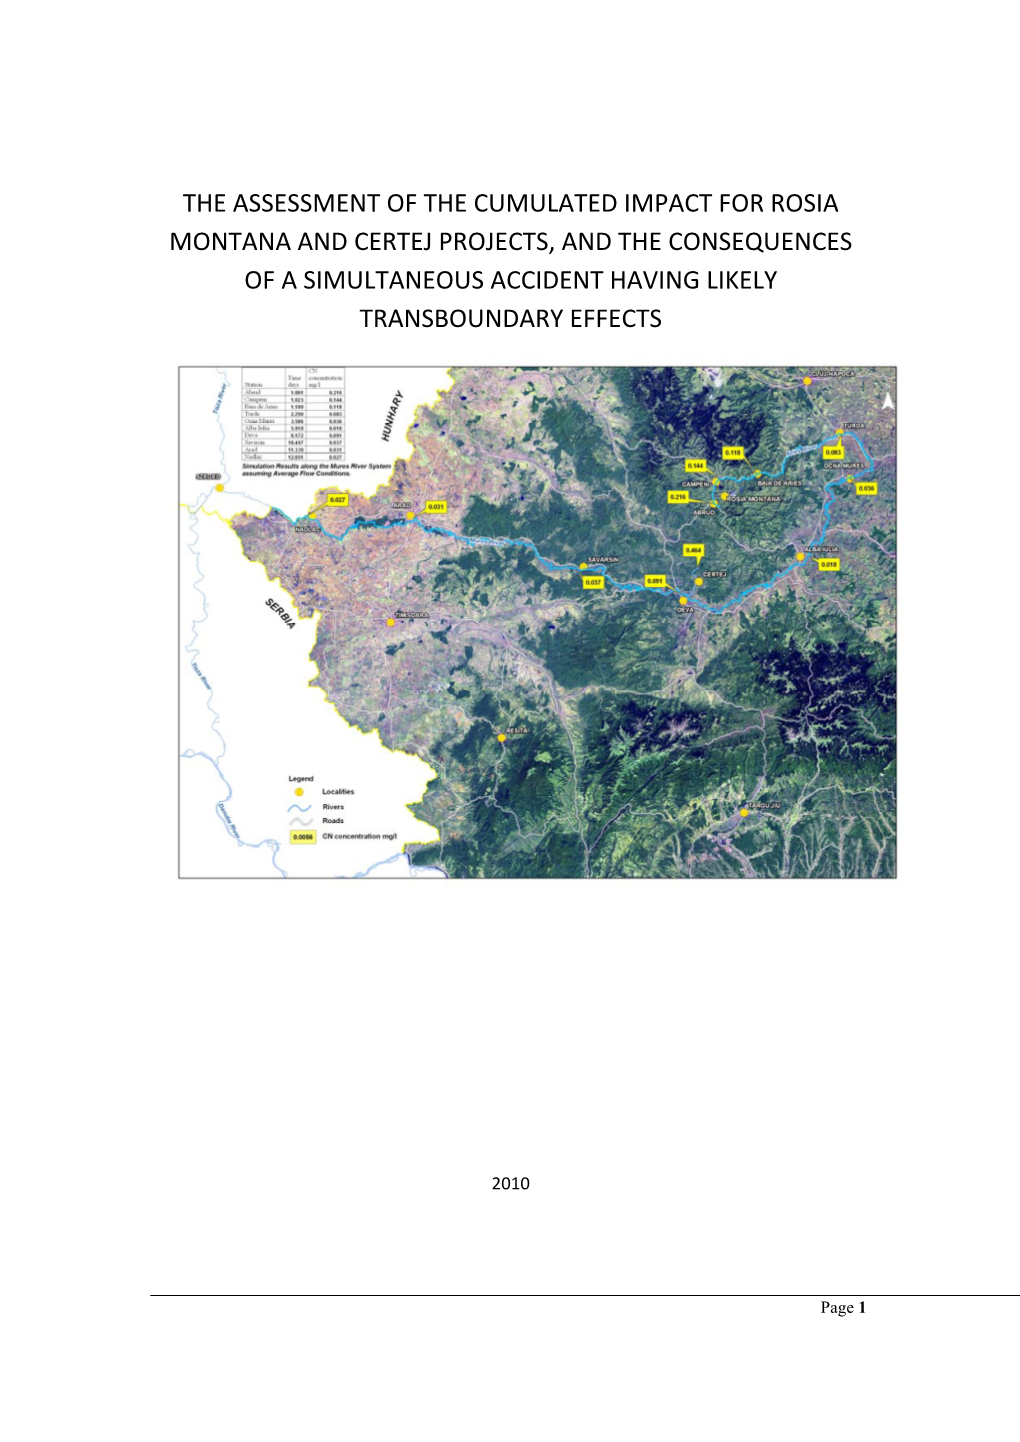 The Assessment of the Cumulated Impact for Rosia Montana and Certej Projects, and the Consequences of a Simultaneous Accident Having Likely Transboundary Effects